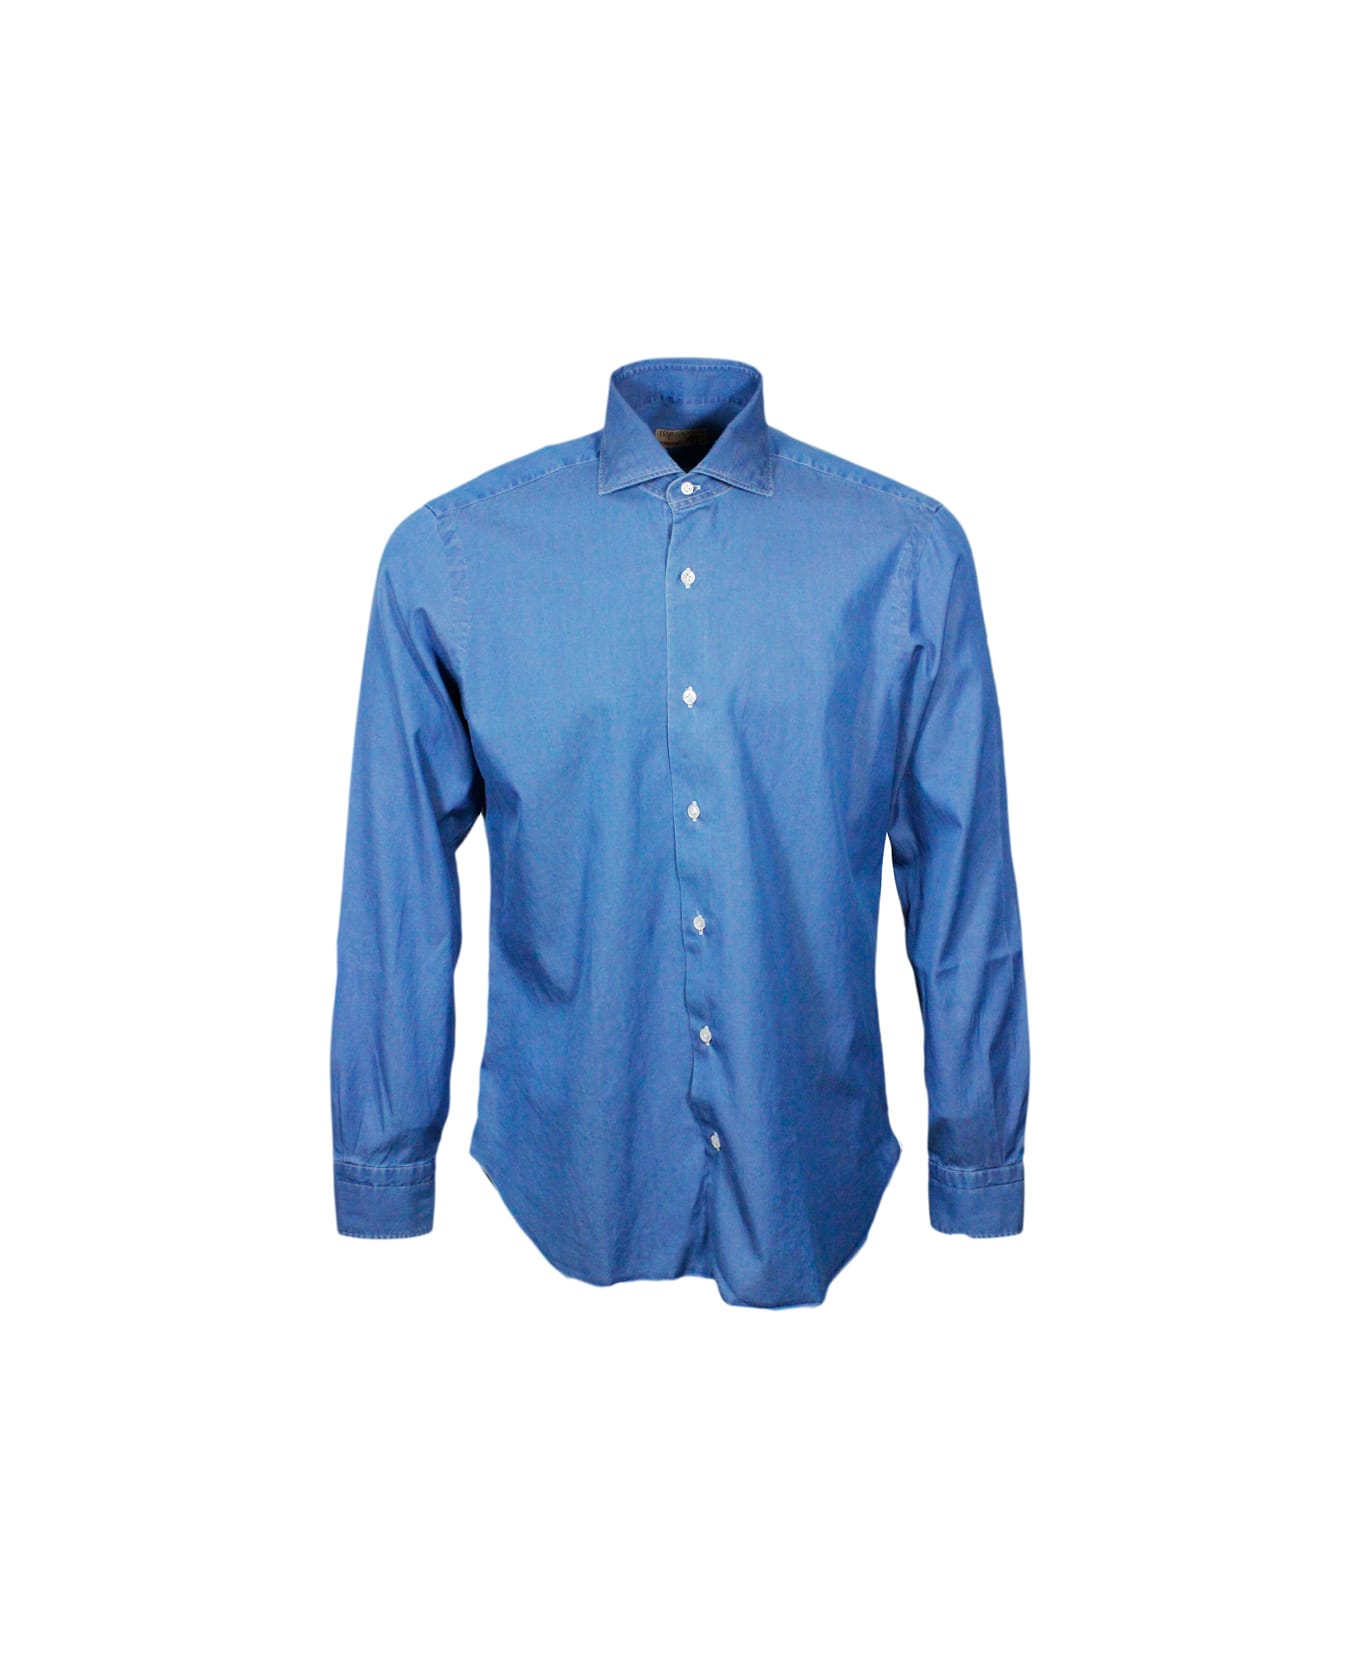 Barba Napoli Dandylife Denim Shirt With Hand-sewn Italian Collar And Mother-of-pearl Buttons - Denim